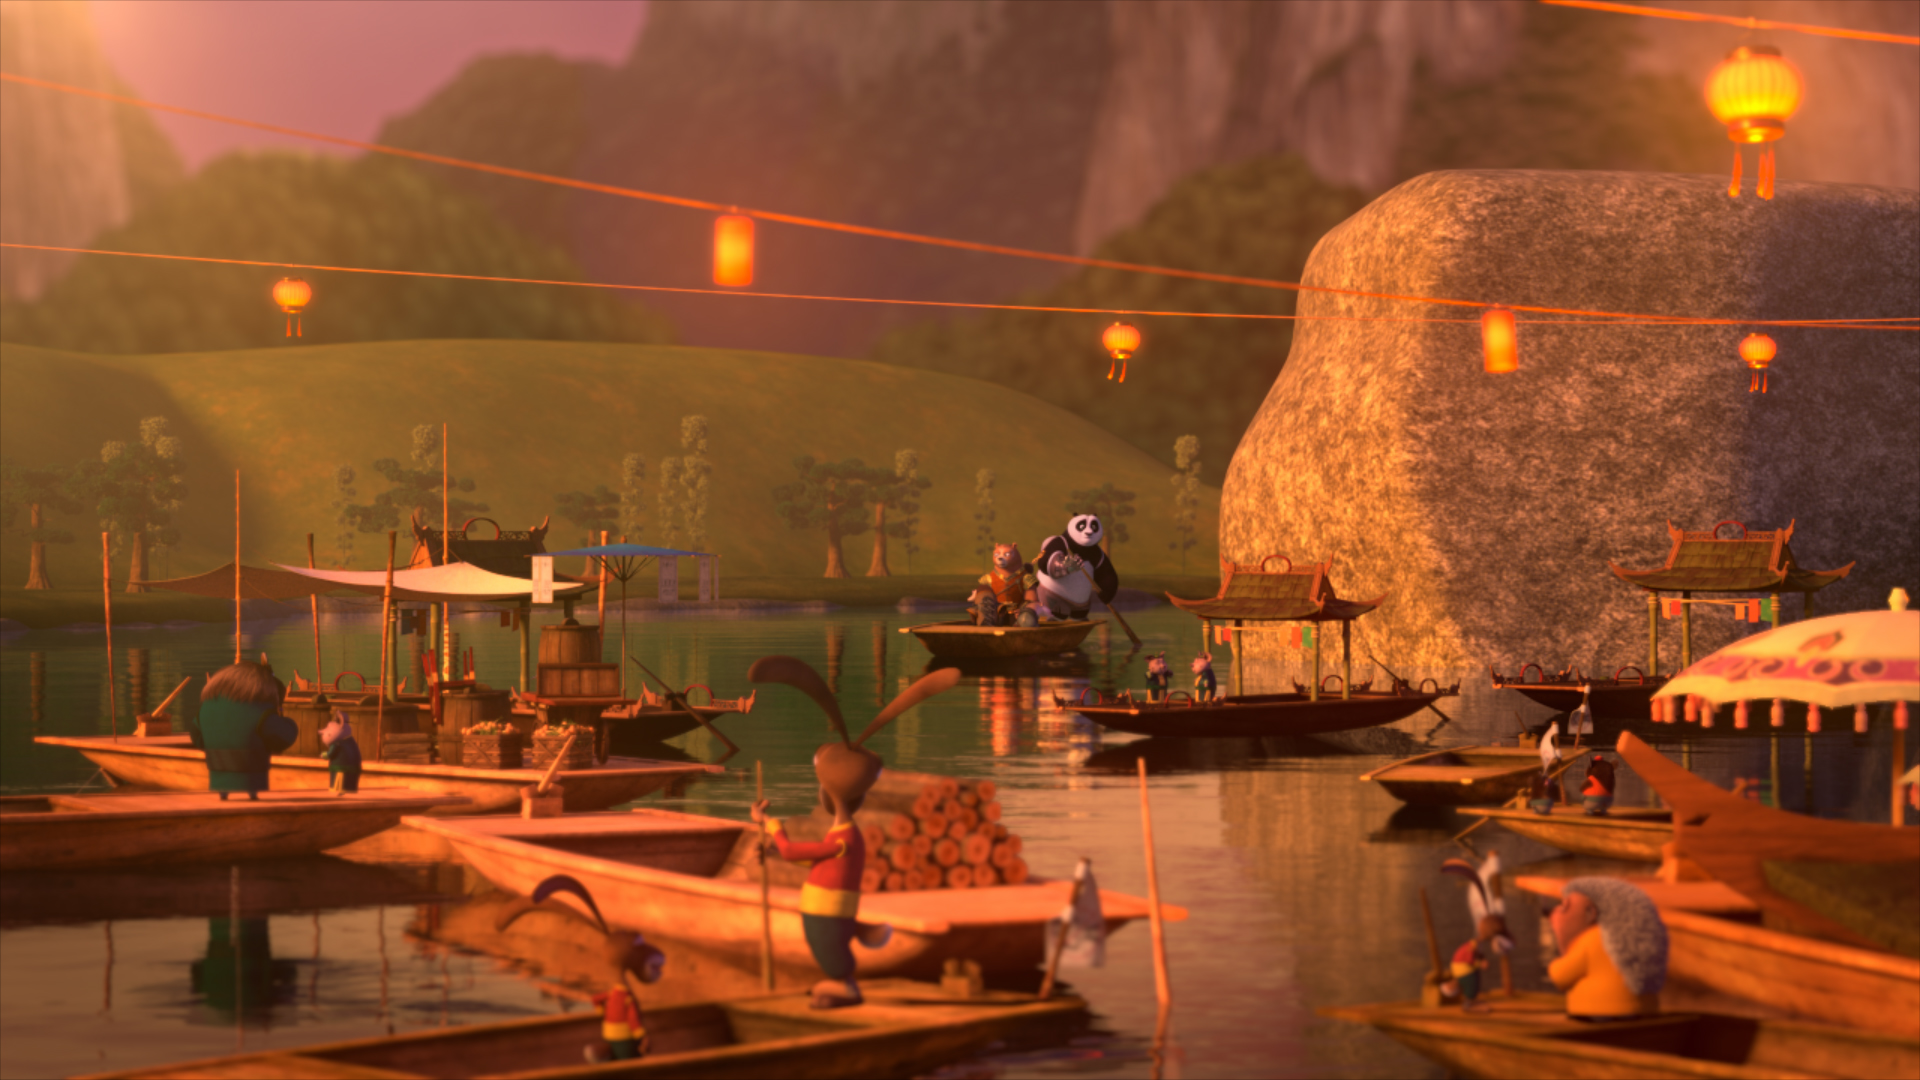 Kung Fu Panda: The Dragon Knight Picture